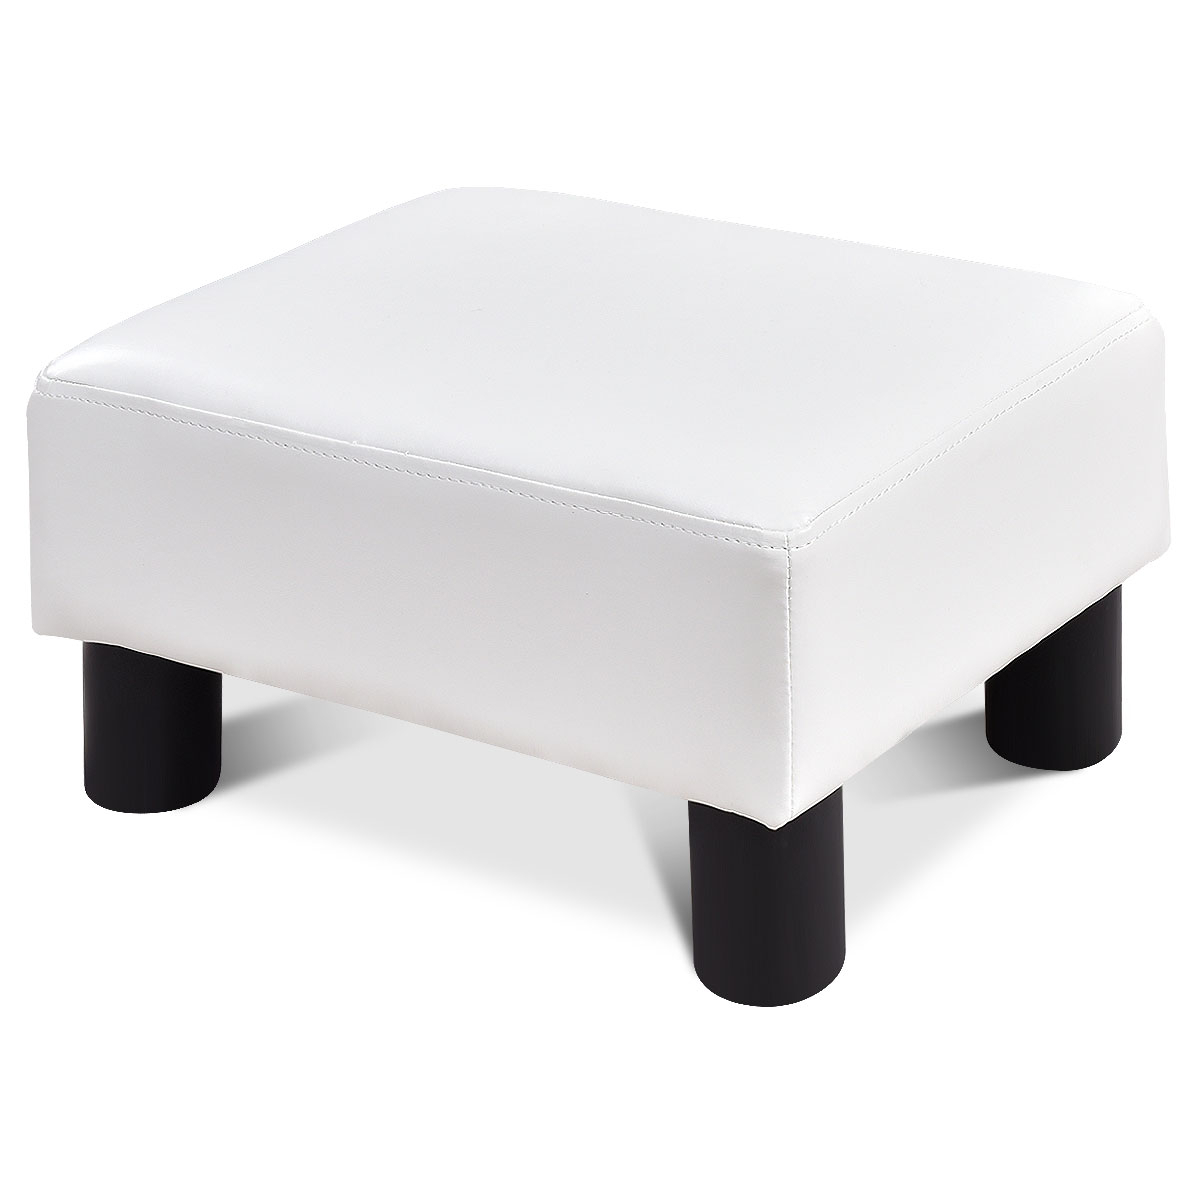 PU Leather Ottoman Rectangular Footrest Small Stool Black/Red/White - White